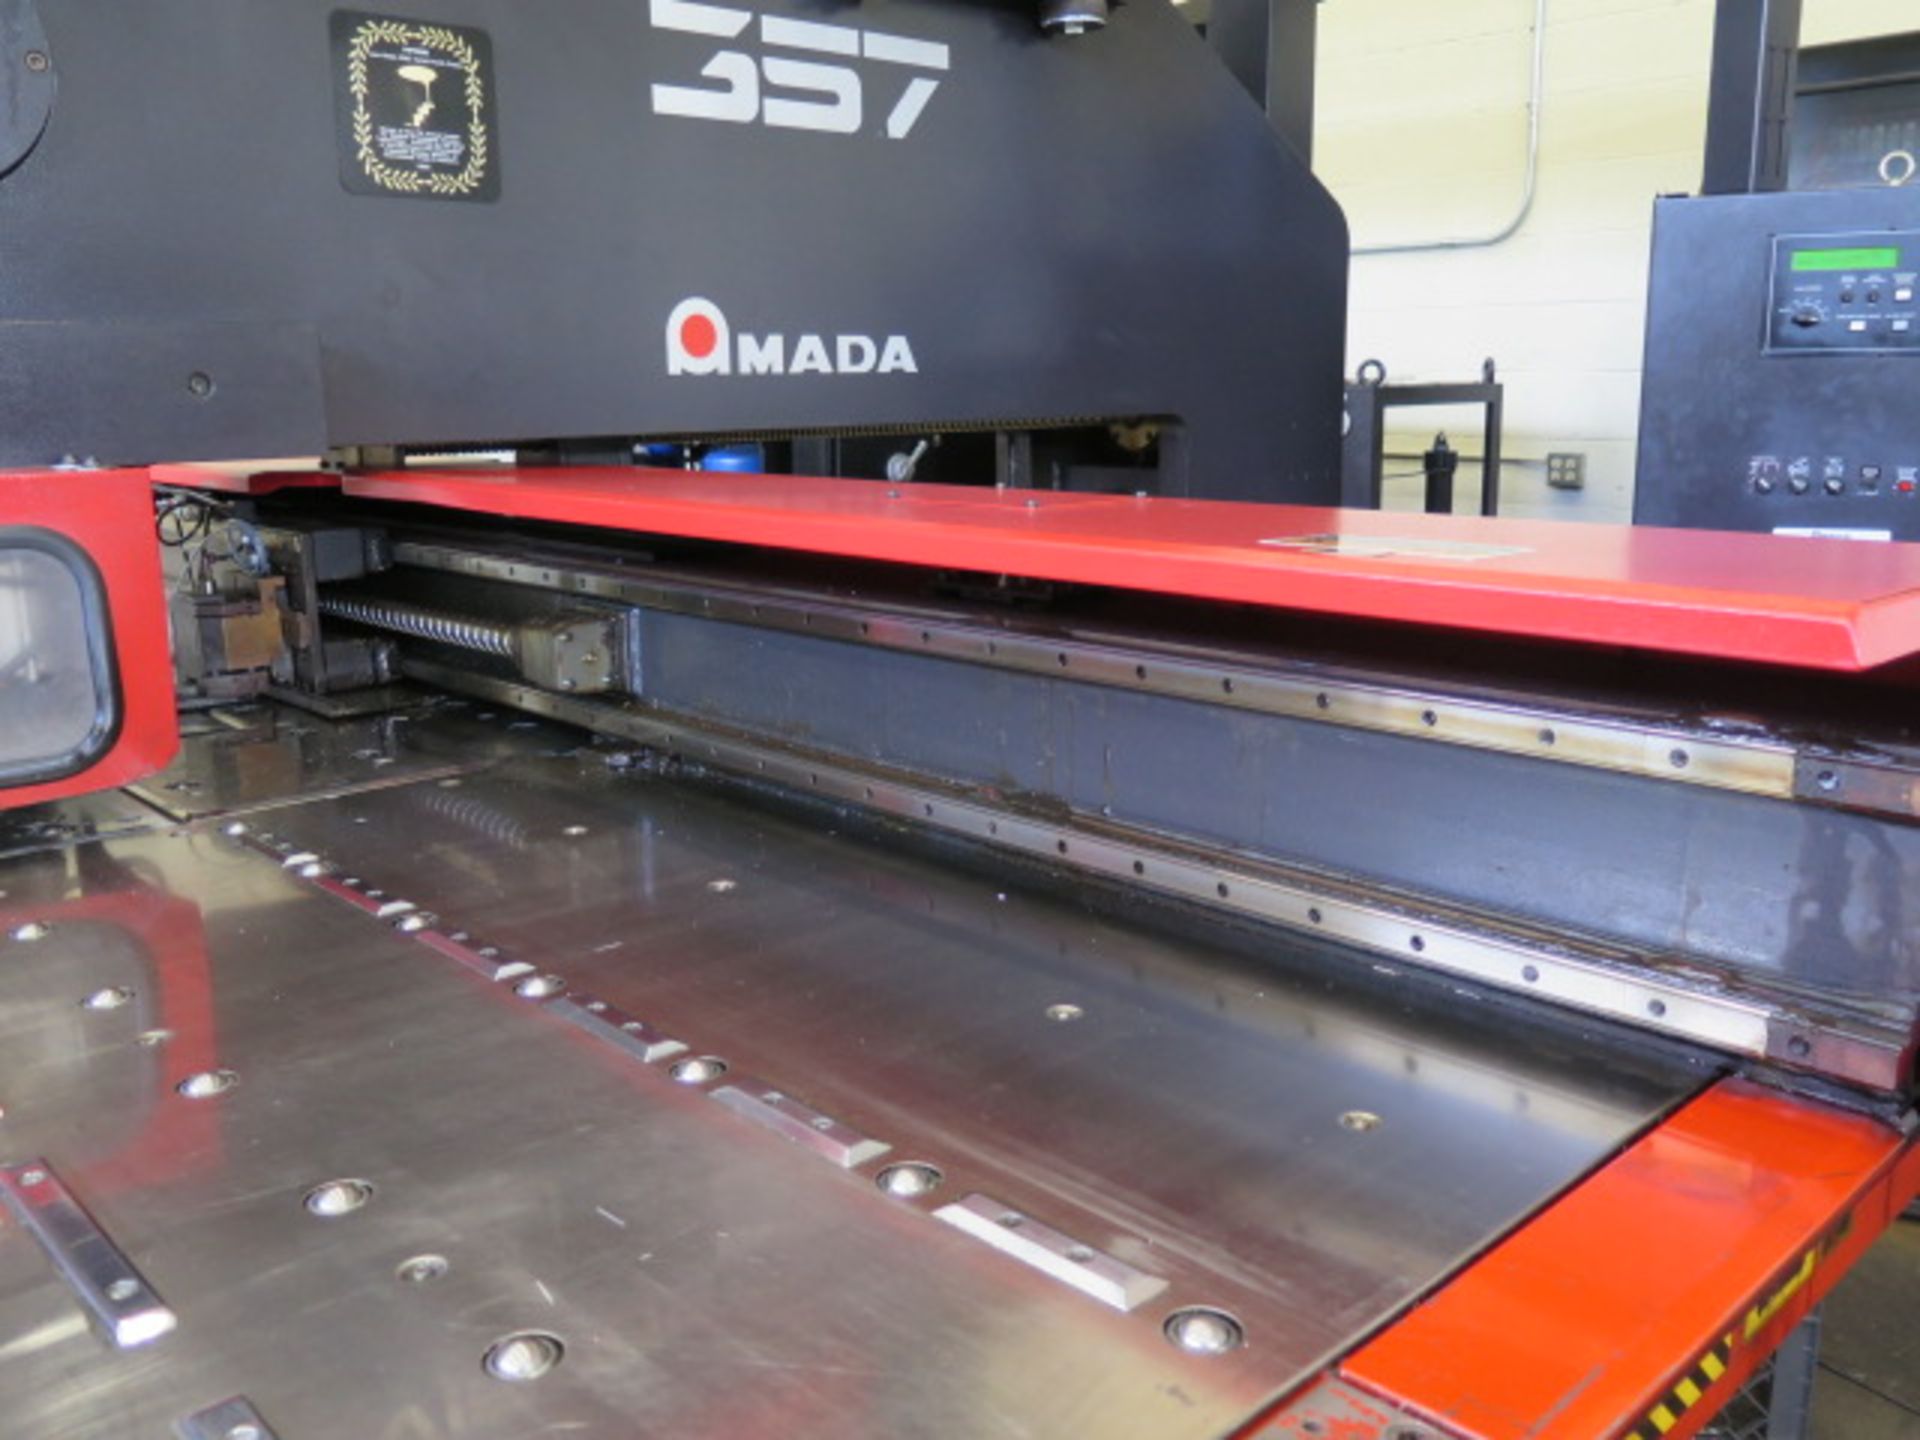 Amada VIPROS 357 30-Ton CNC Turret Punch Cell s/n 35710664 w/ 04P-C Controls, 58-Station, SOLD AS IS - Image 5 of 37